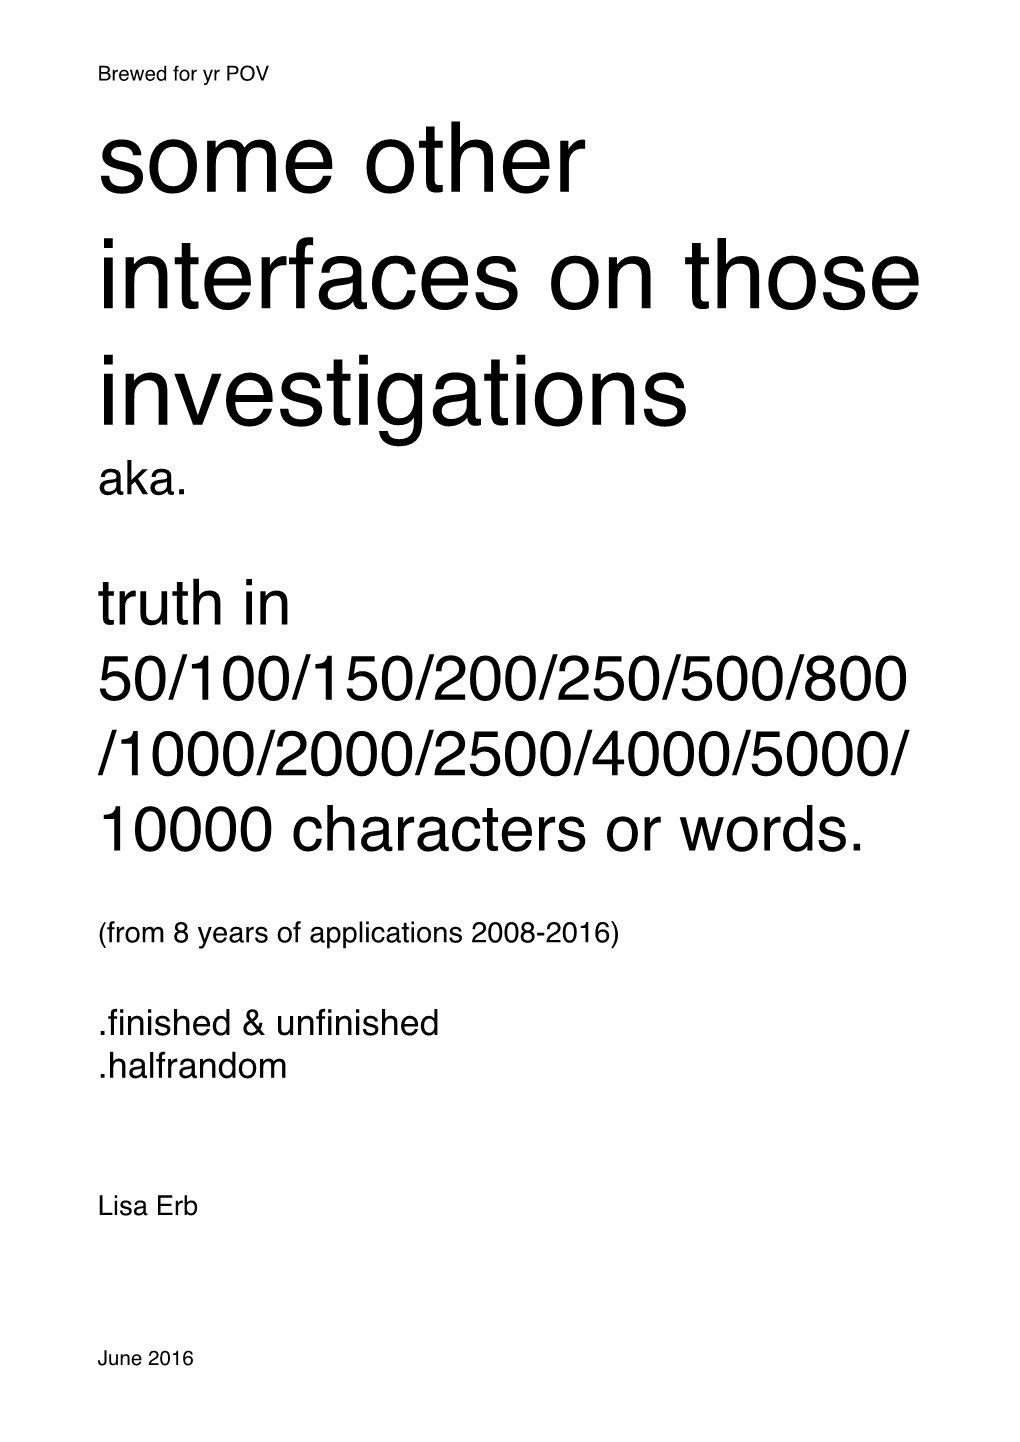 Some Other Interfaces on Those Investigations Aka